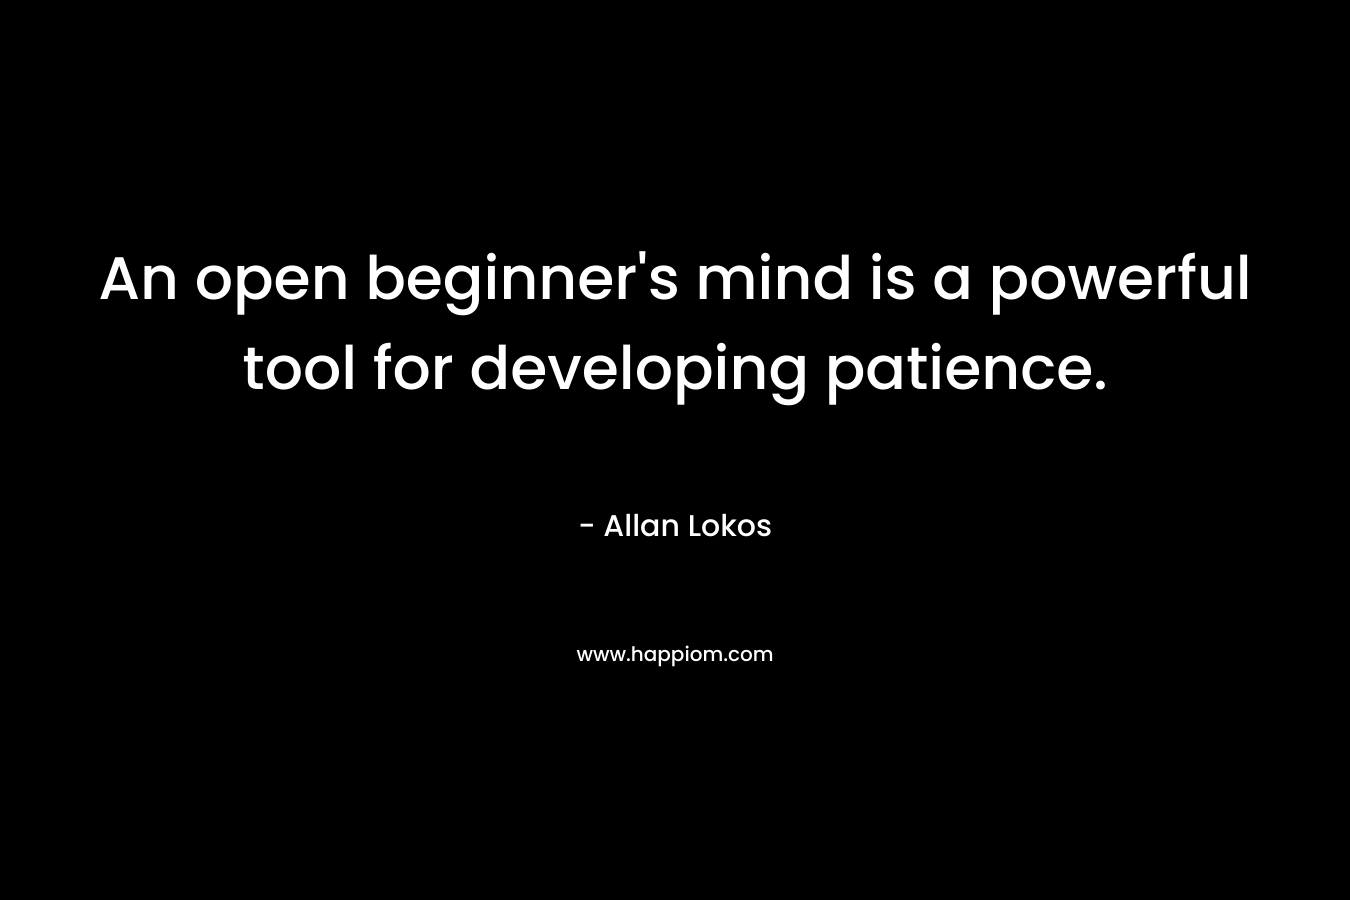 An open beginner’s mind is a powerful tool for developing patience. – Allan Lokos